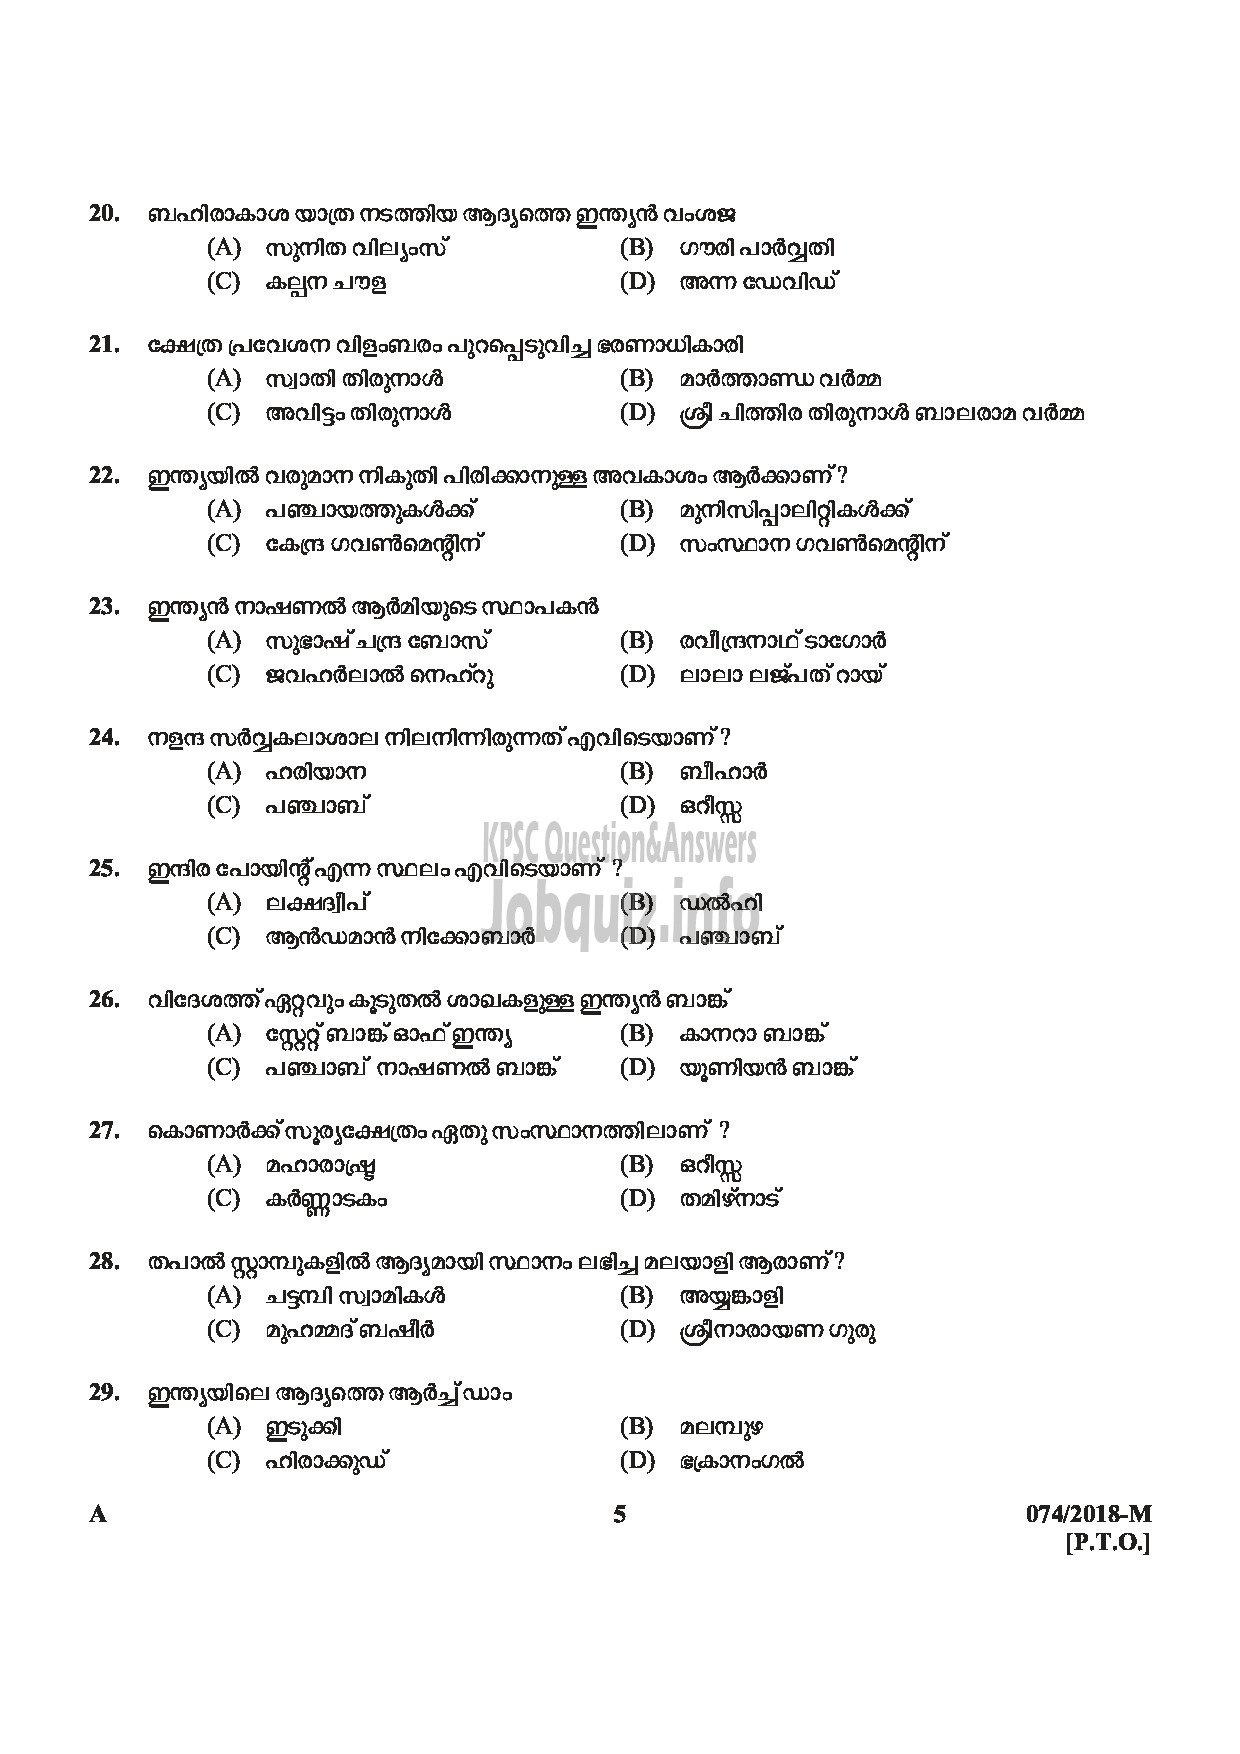 Kerala PSC Question Paper - POLICE CONSTABLE DRIVER ARMED POLICE BATTALION POLICE-5